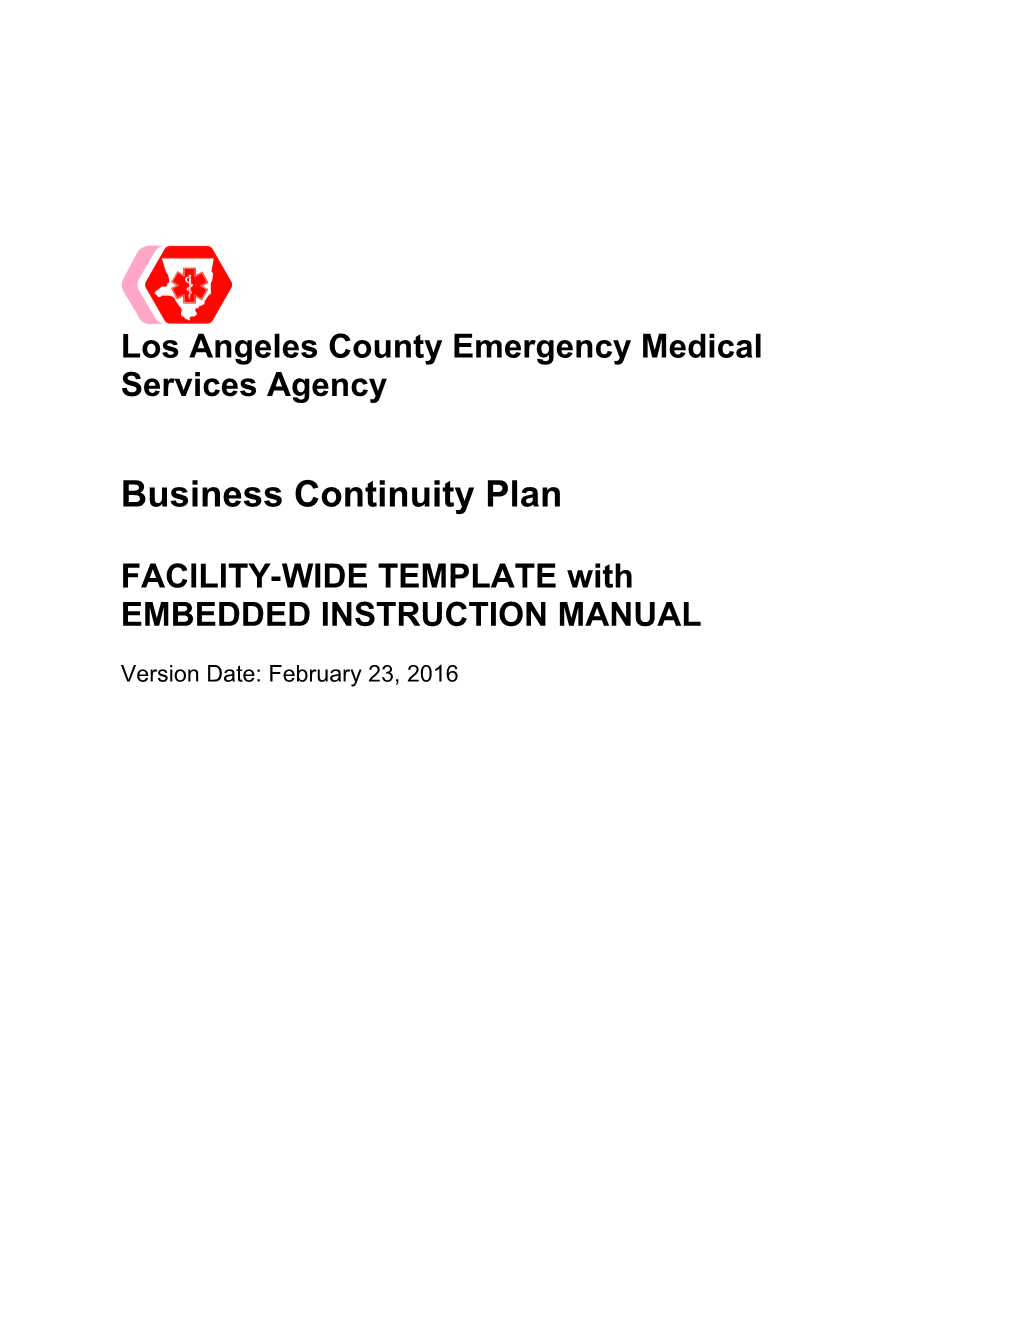 Los Angeles County Emergency Medical Services Agency